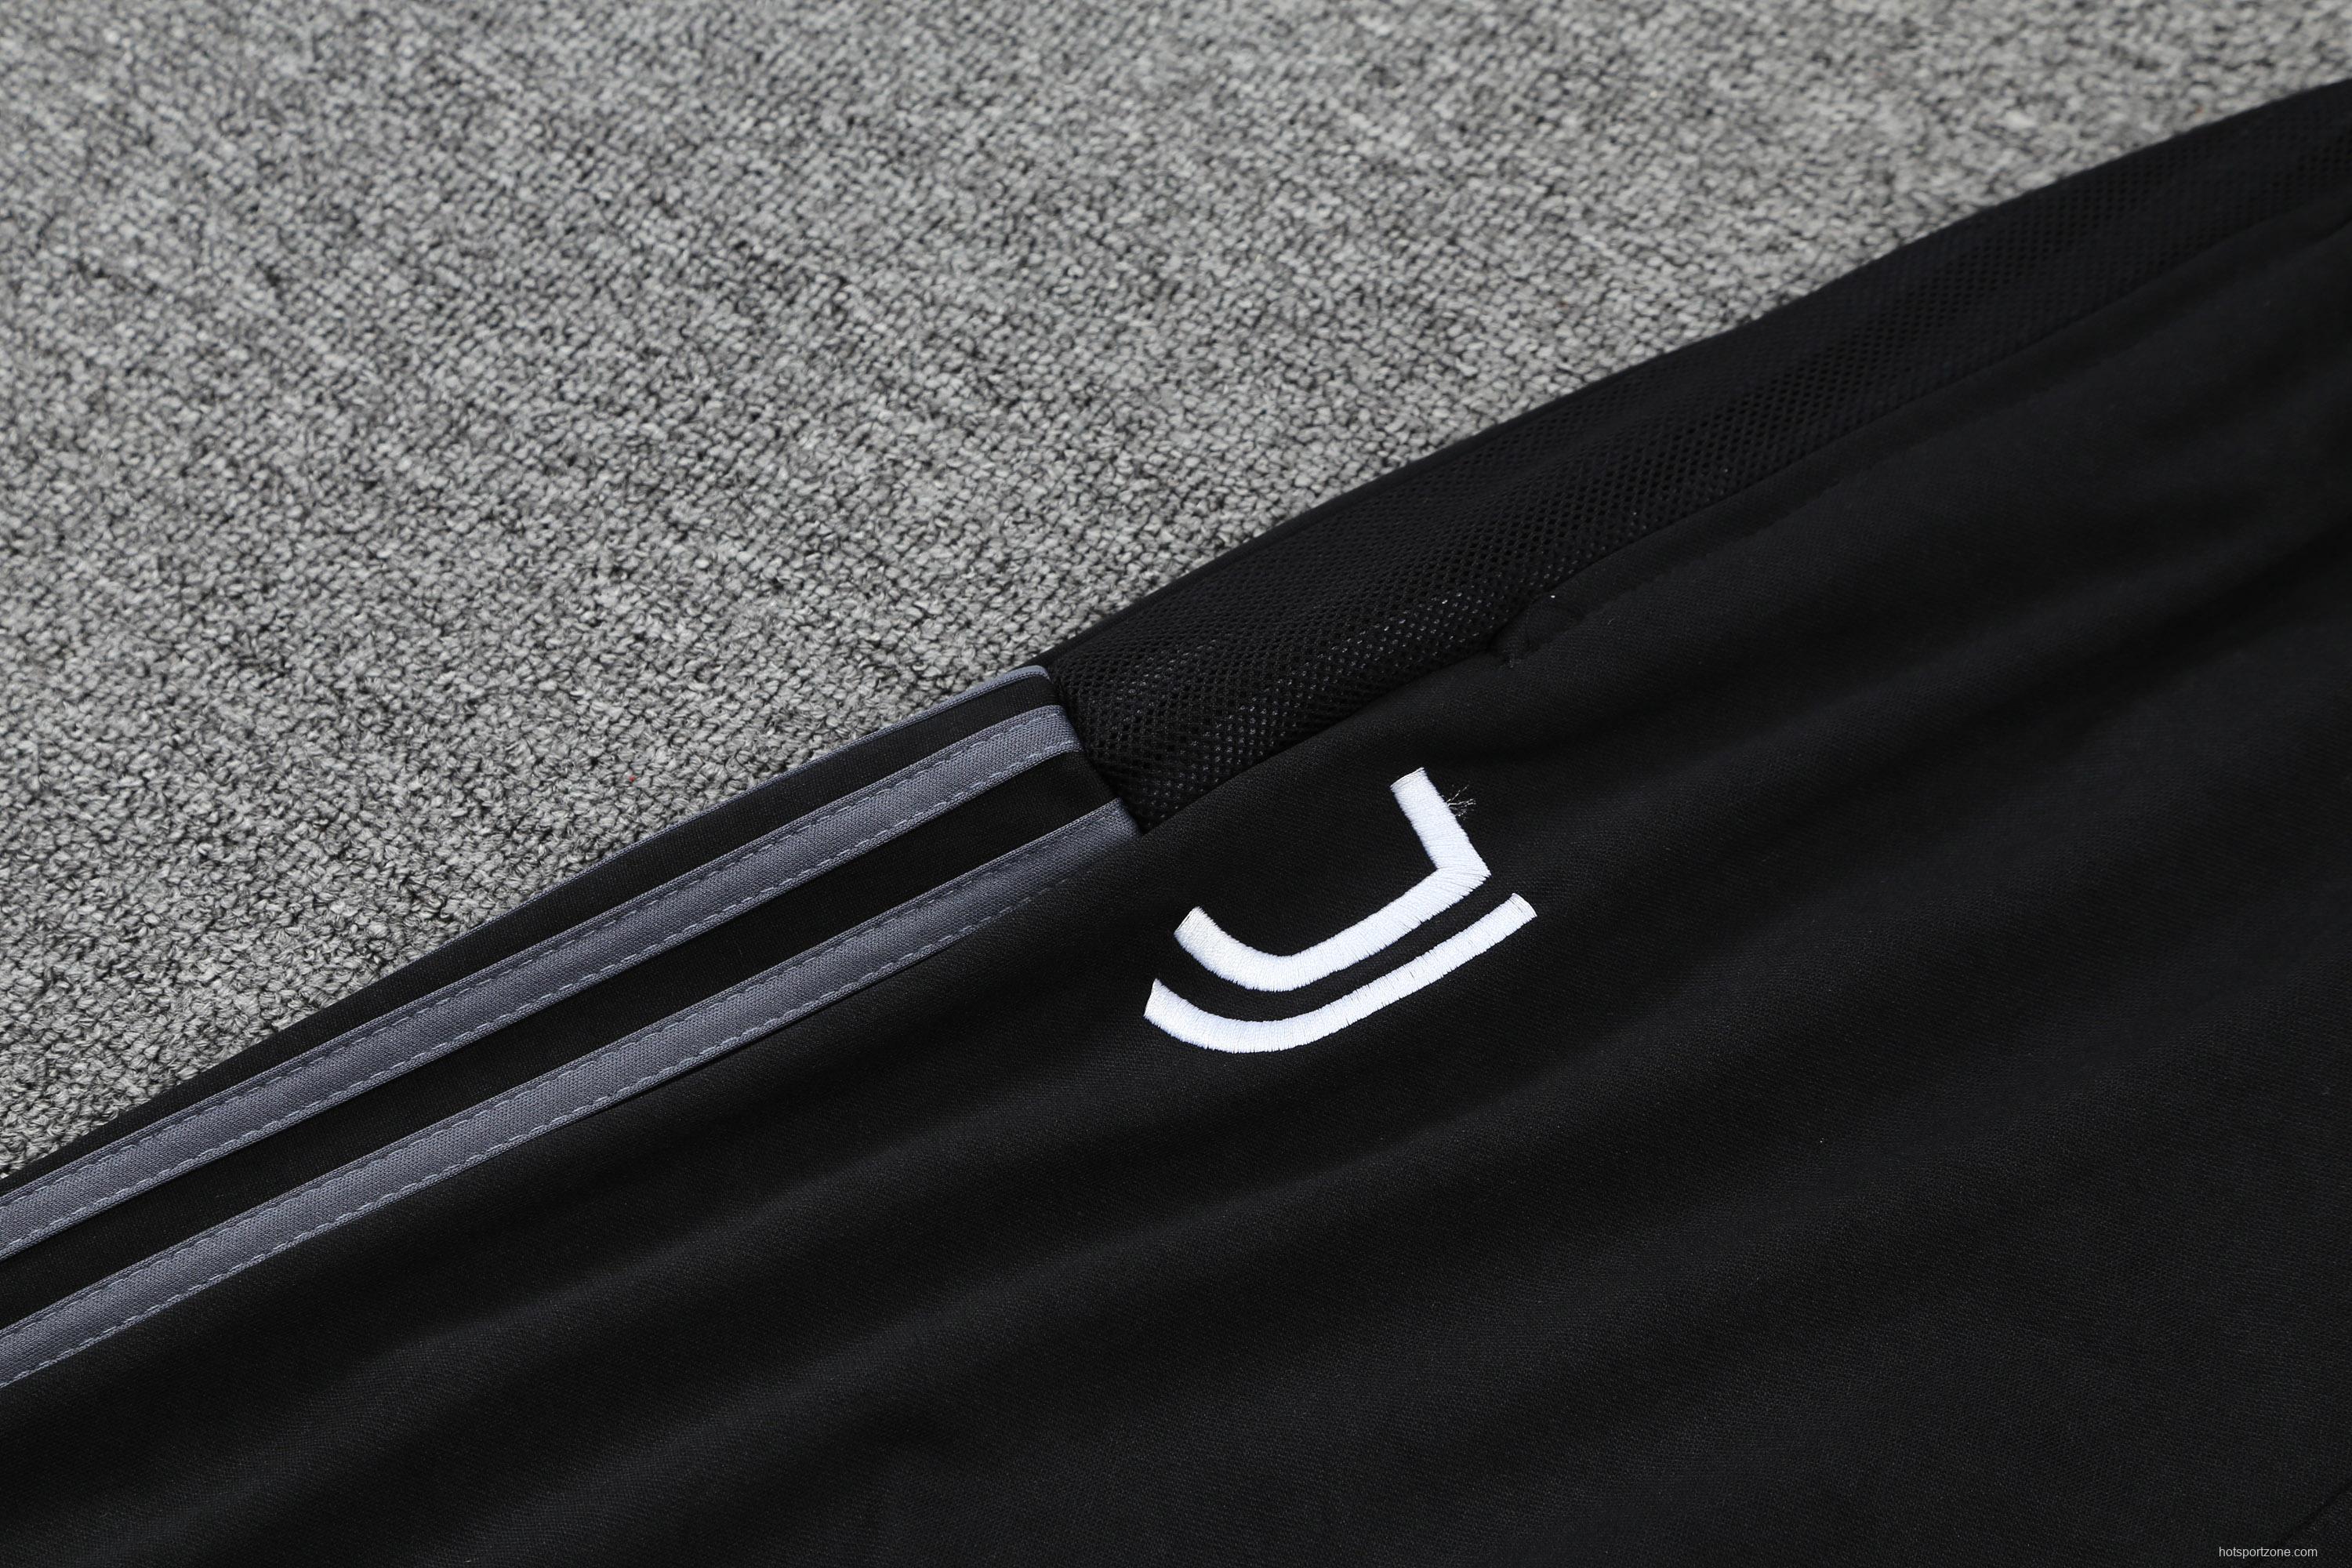 Juventus POLO kit Black(not supported to be sold separately)